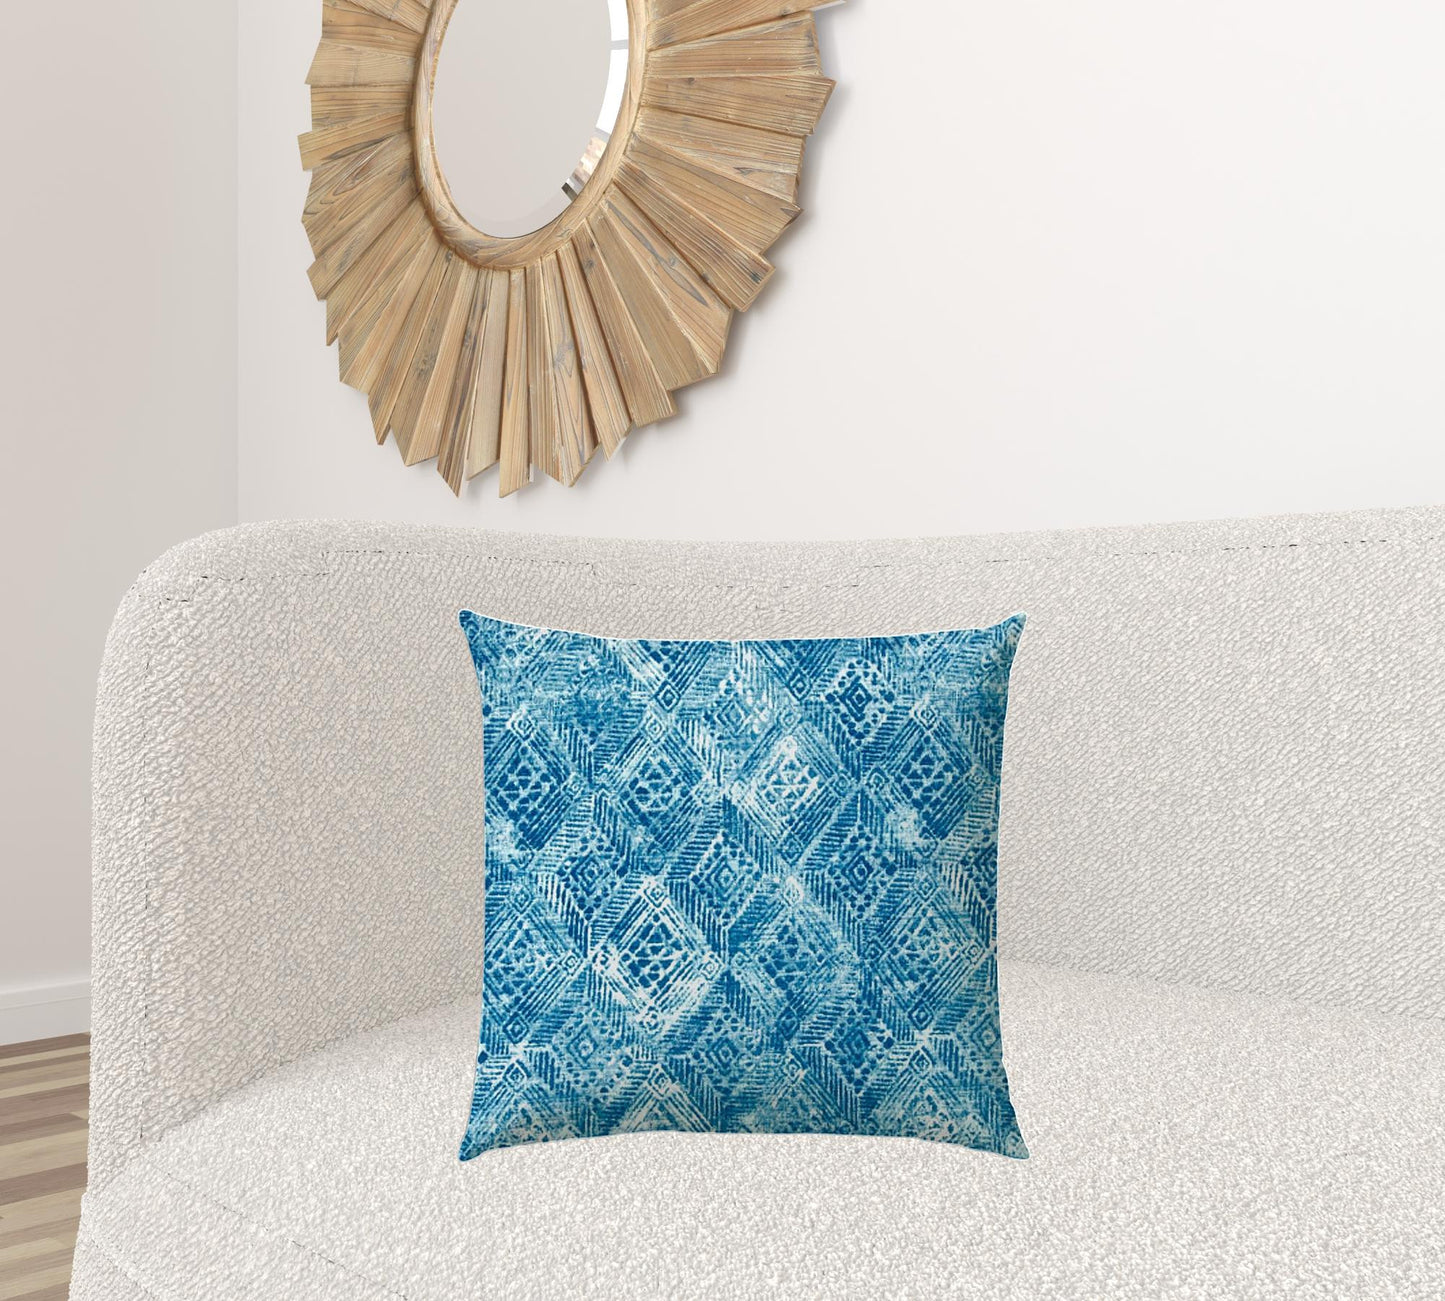 20" X 20" Blue And White Blown Seam Ikat Throw Indoor Outdoor Pillow